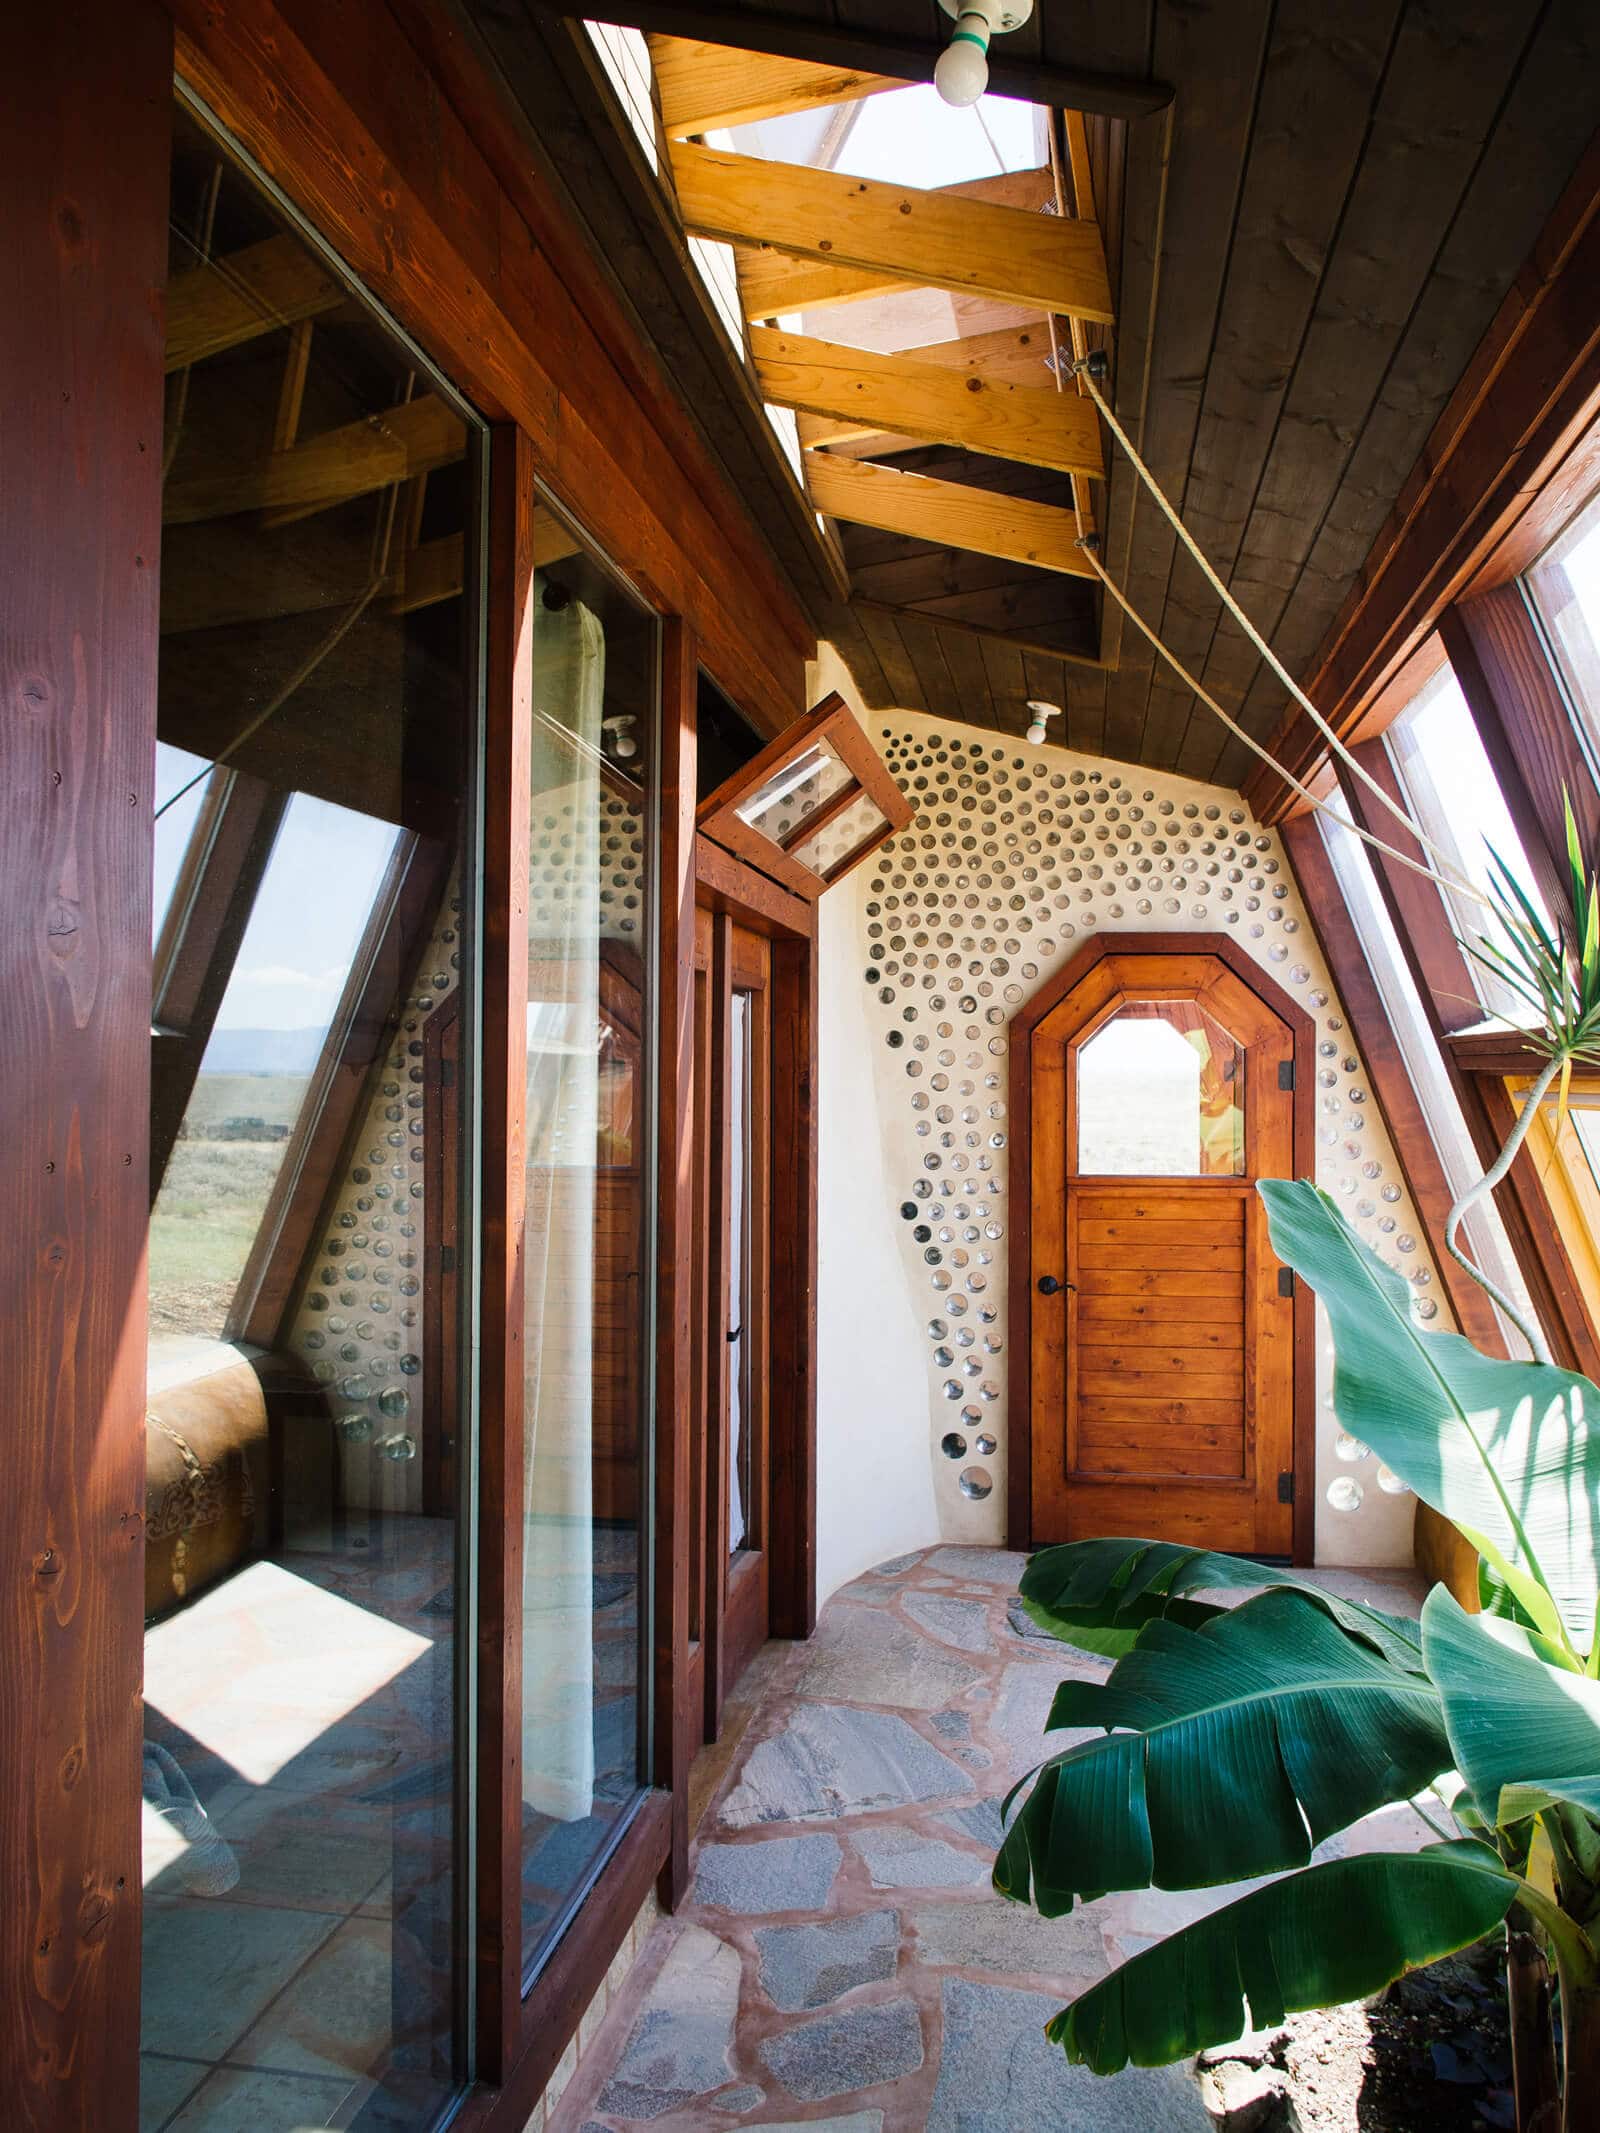 Letting in the breeze in an Earthship greenhouse